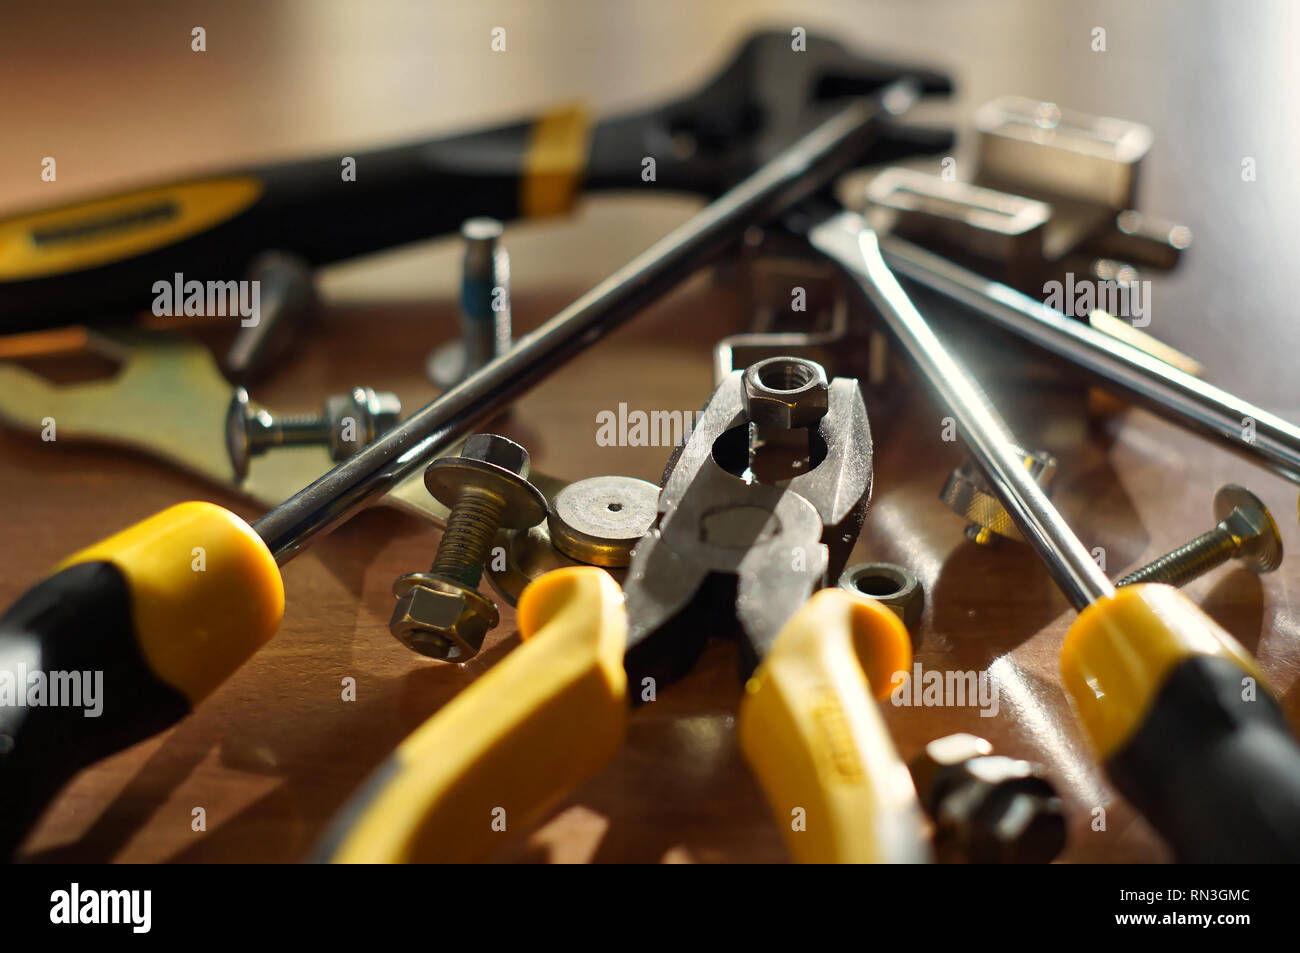 Do It Yourself DIY accessories - locksmith tools, wrenches, screwdrivers, pliers, nuts and bolts on a wooden table Stock Photo